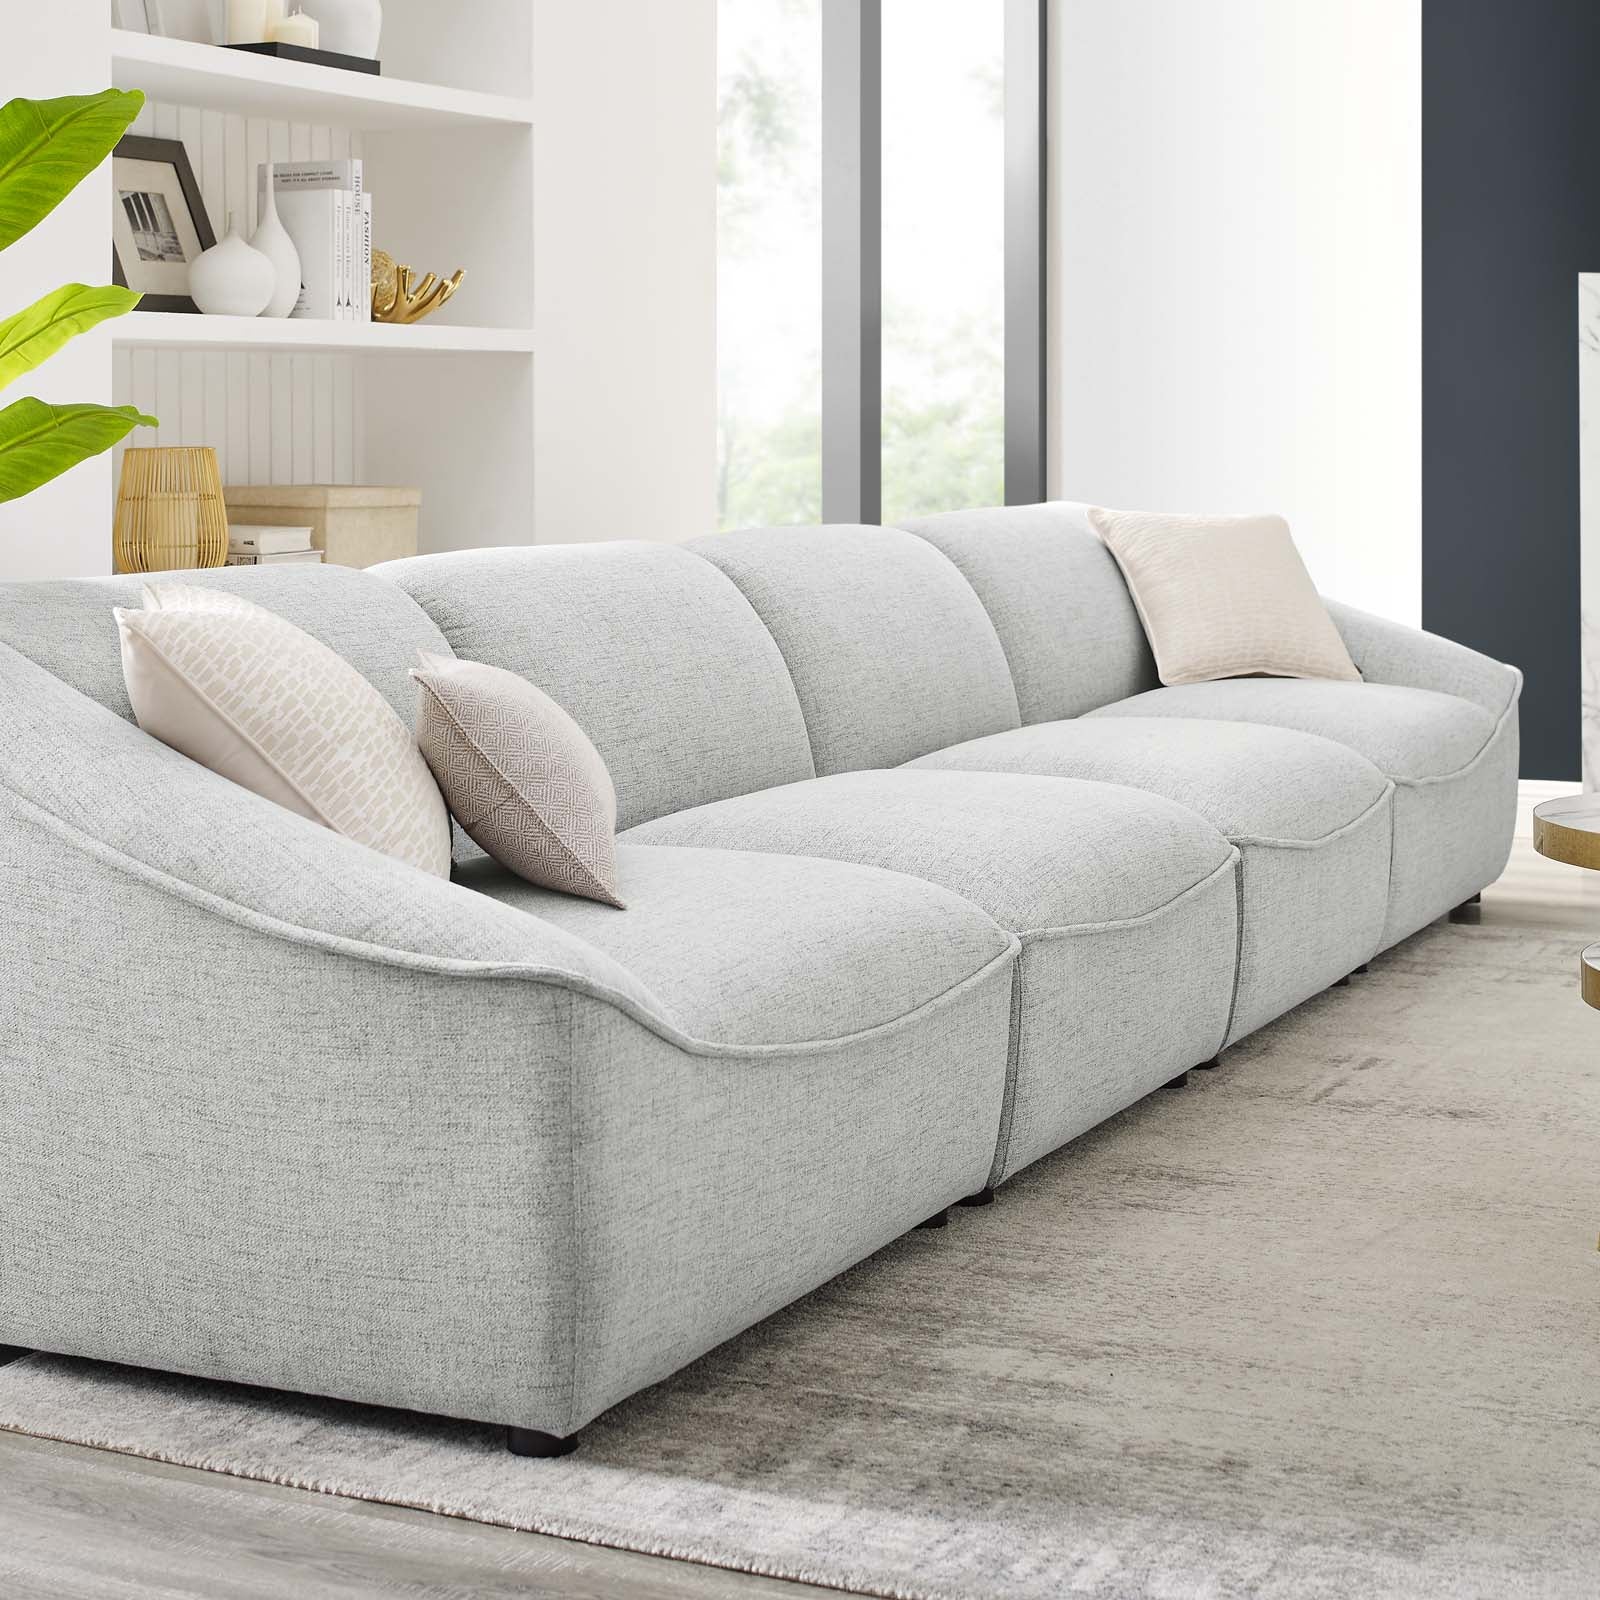 Comprise 4-Piece Sofa - East Shore Modern Home Furnishings